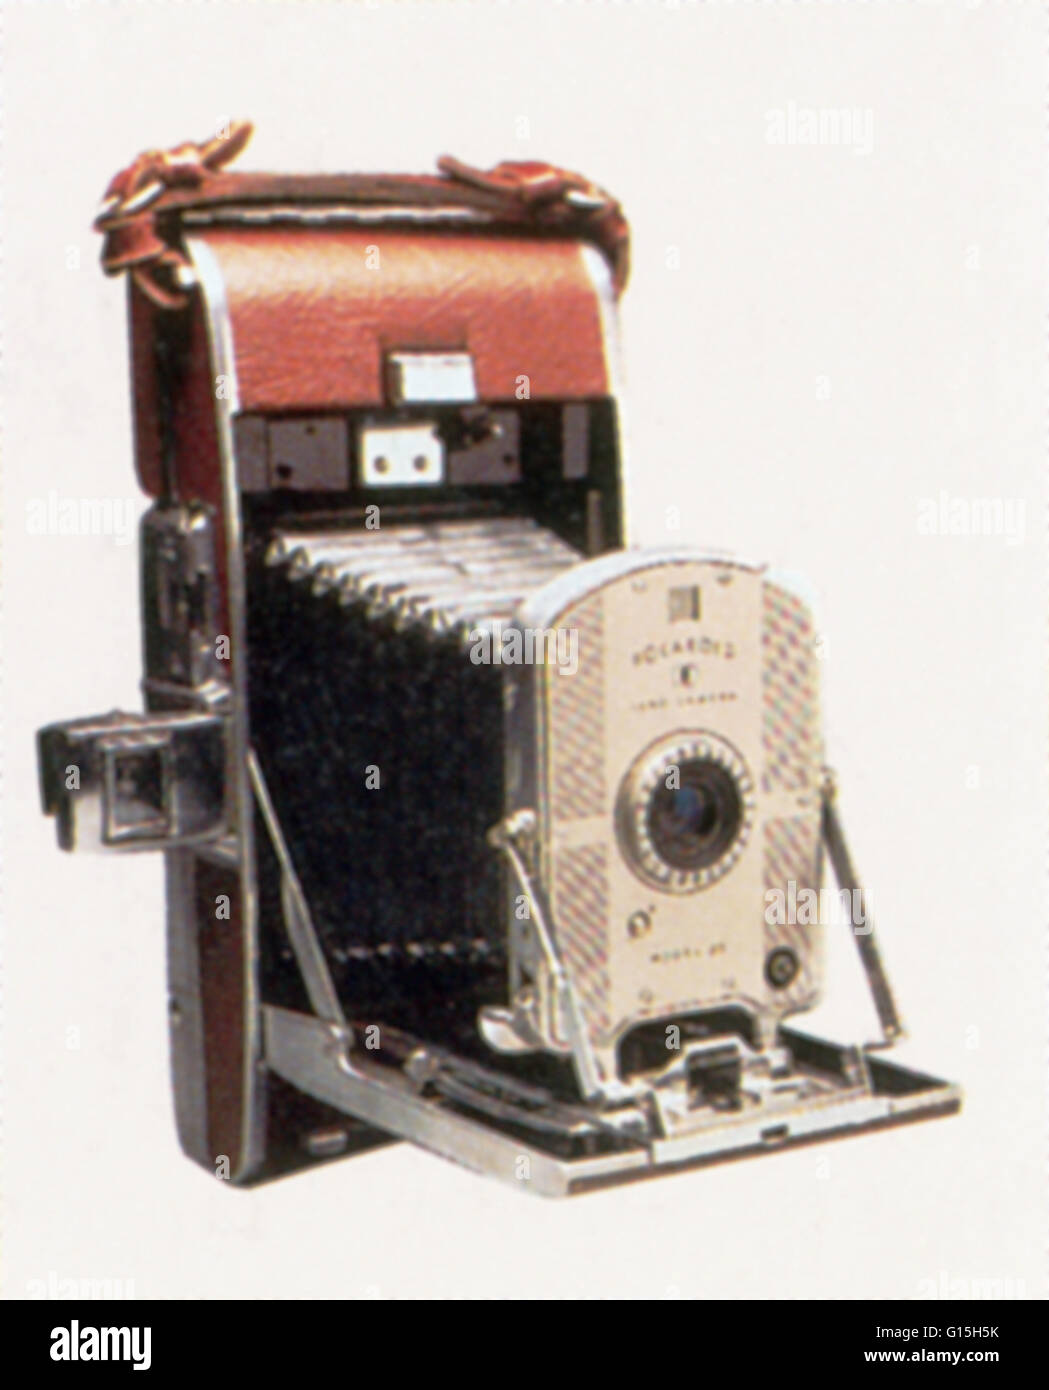 Polaroid Land Camera, invented in 1947 by Edwin Land. Edwin Herbert Land  (1909-1991) was an American scientist and inventor, best known as the  co-founder of the Polaroid Corporation. Among other things, he